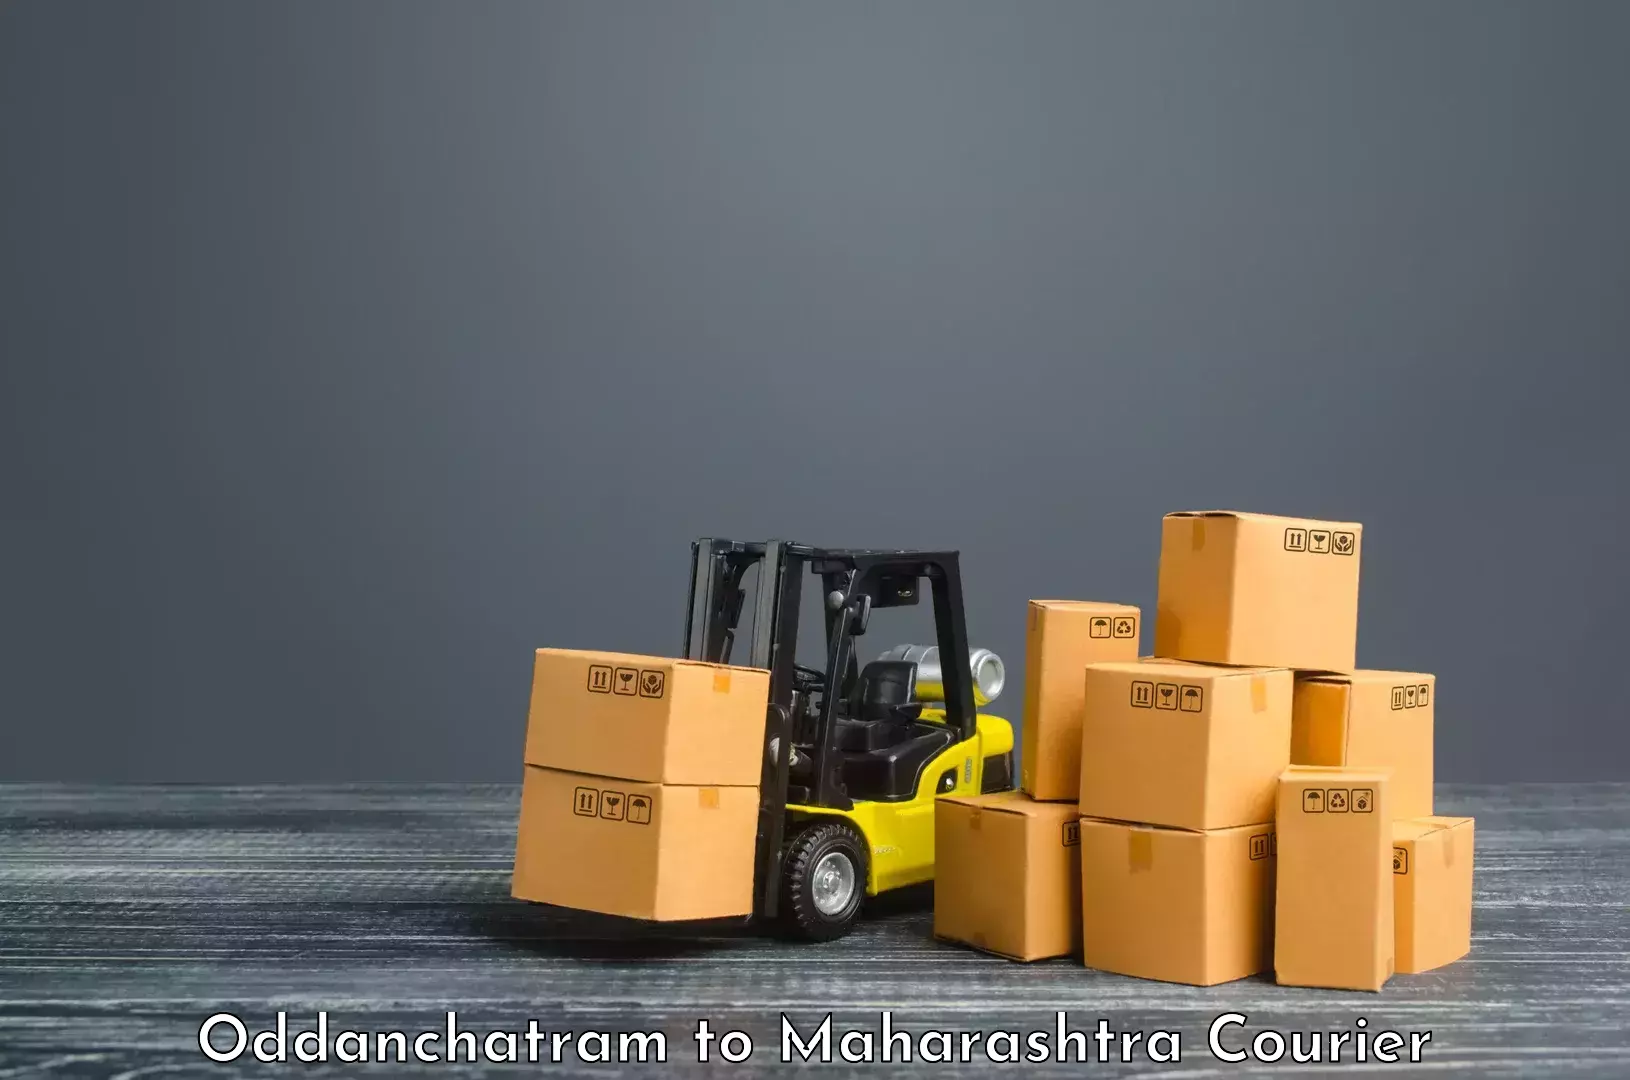 Customer-friendly courier services Oddanchatram to DY Patil Vidyapeeth Mumbai